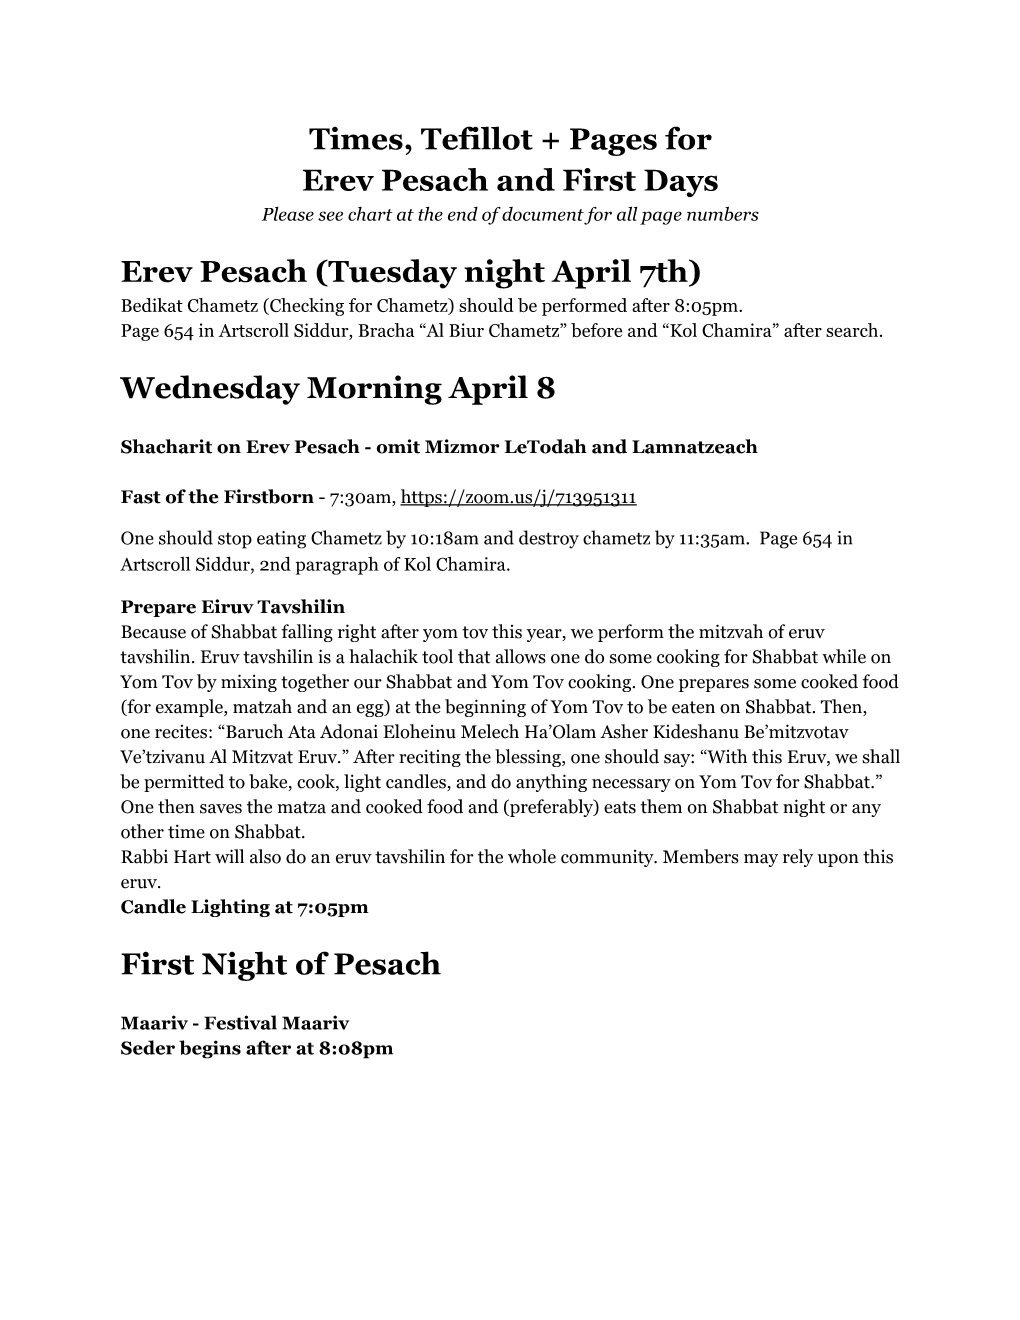 Times, Tefillot + Pages for Erev Pesach and First Days Please See Chart at the End of Document for All Page Numbers